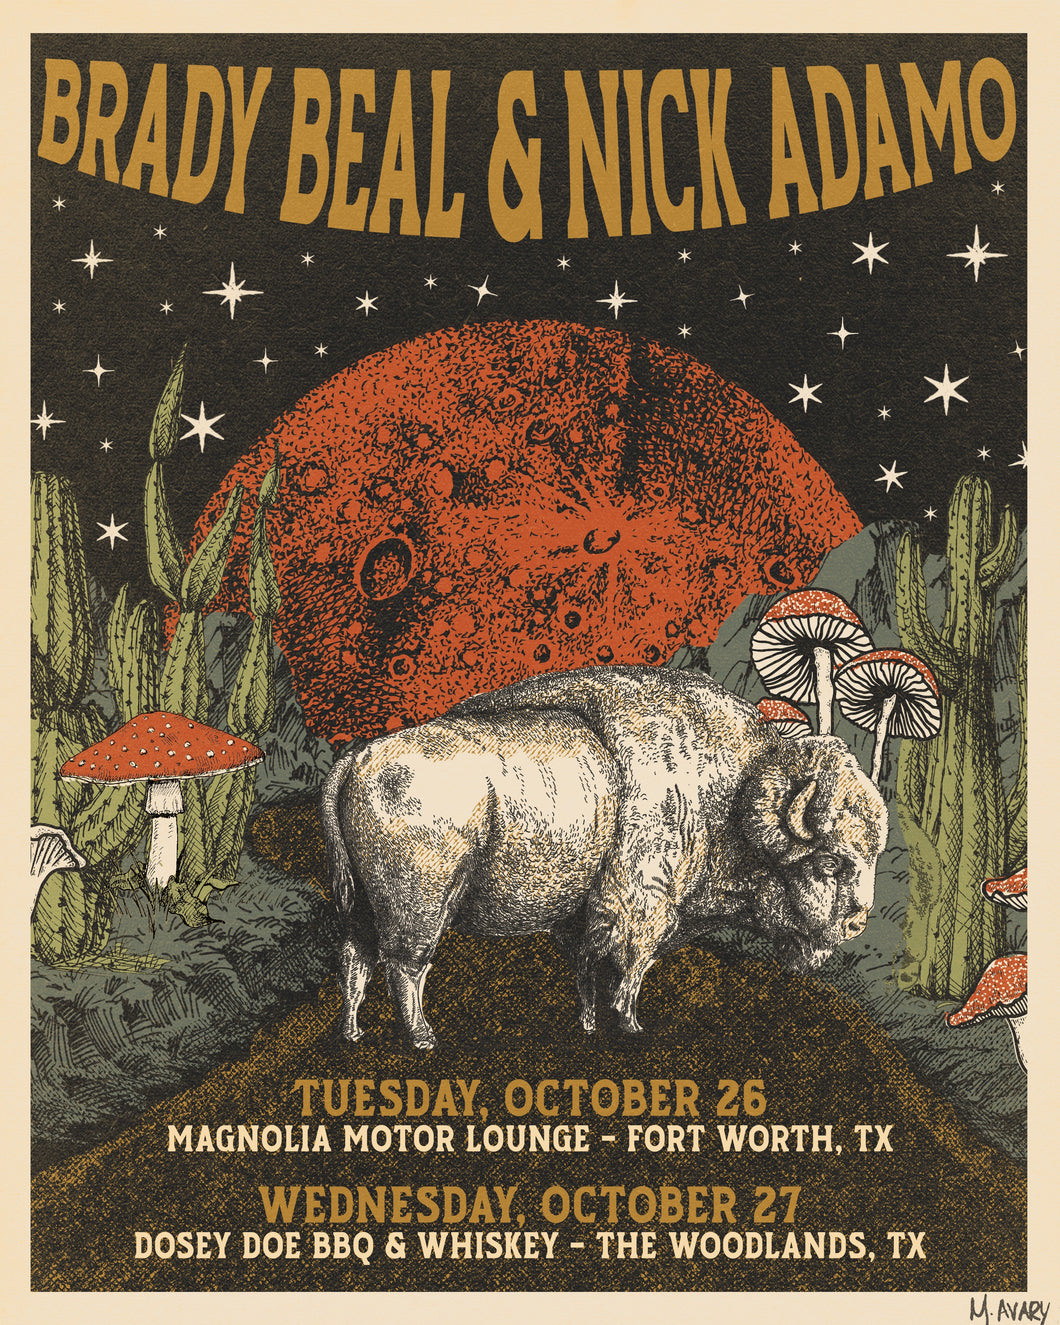 Brady Beal October Run Show Poster - Limited